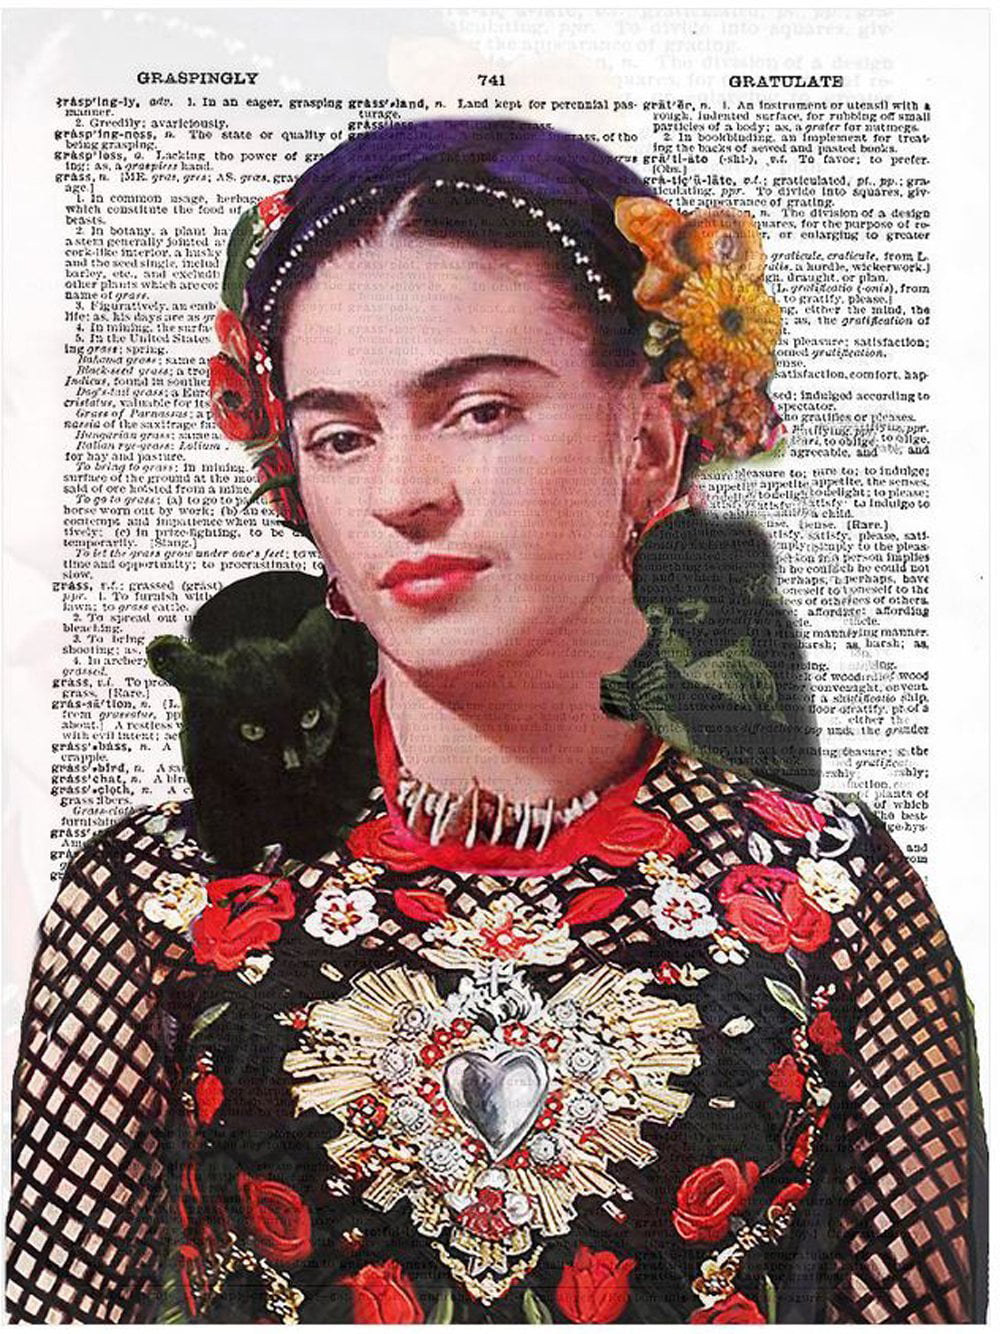 1940 by Frida Kahlo Art Print Poster 16x20 Self-Portrait with Cropped Hair  Antiquitäten & Kunst CO6981643